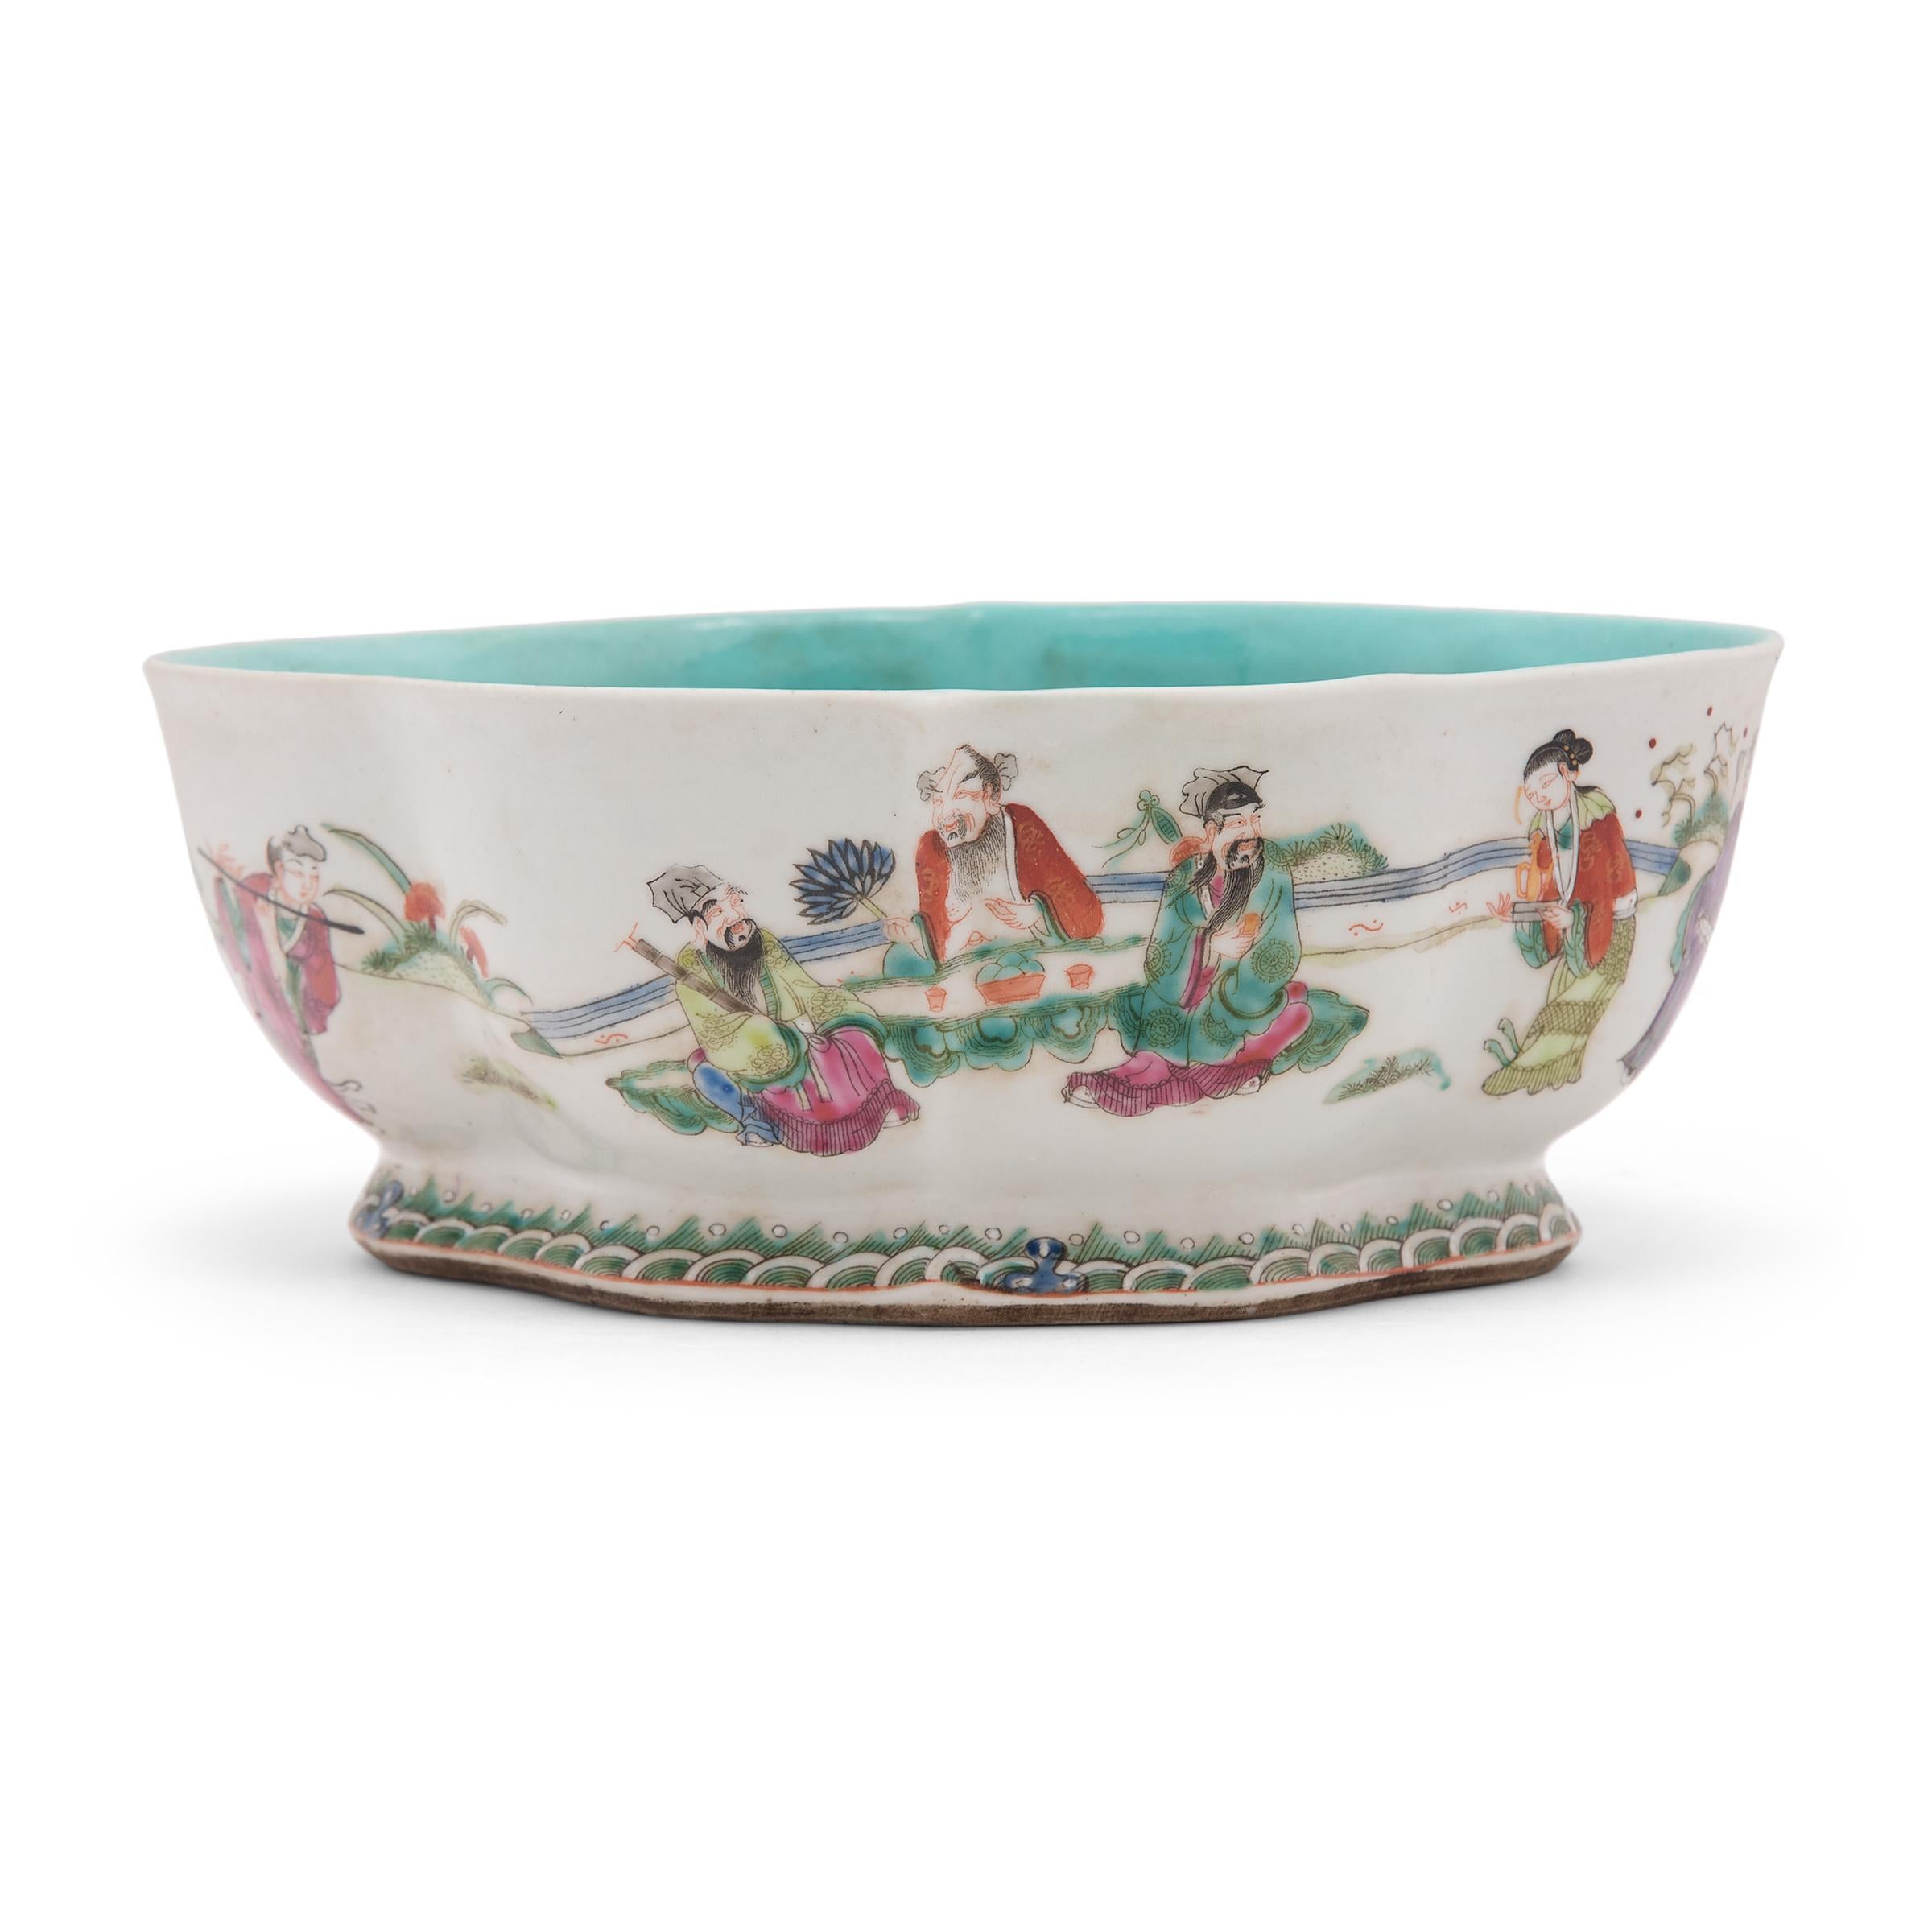 Qing Chinese Footed Offering Bowl with Gathering of Immortals, c. 1900